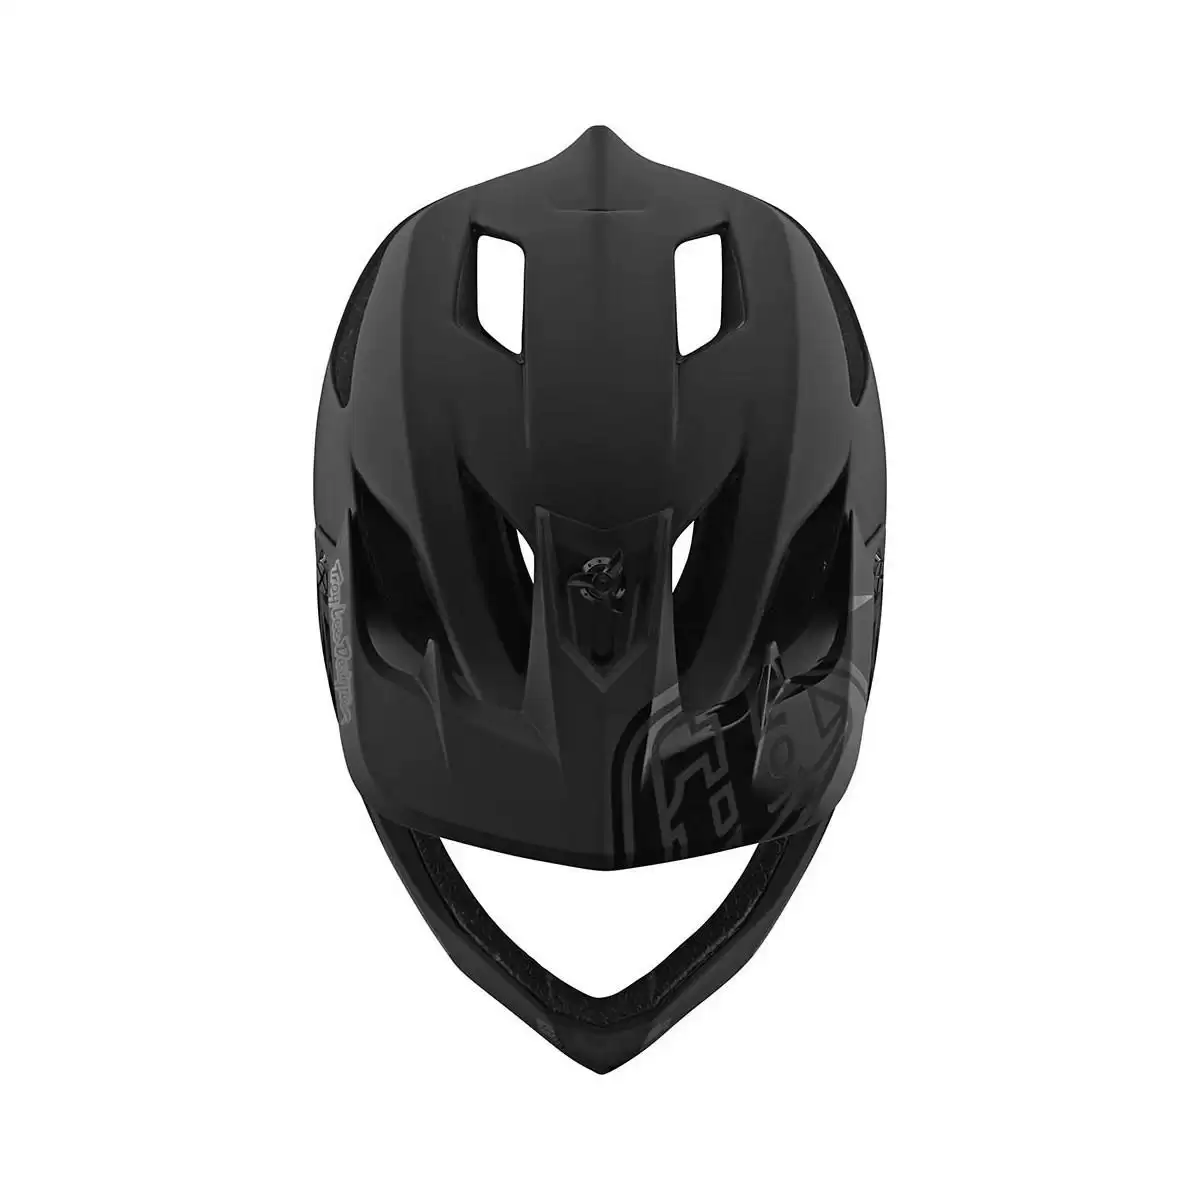 Full Face Helmet Stage MIPS Stealth Midnight Black Size XS/S (54-56cm) #2